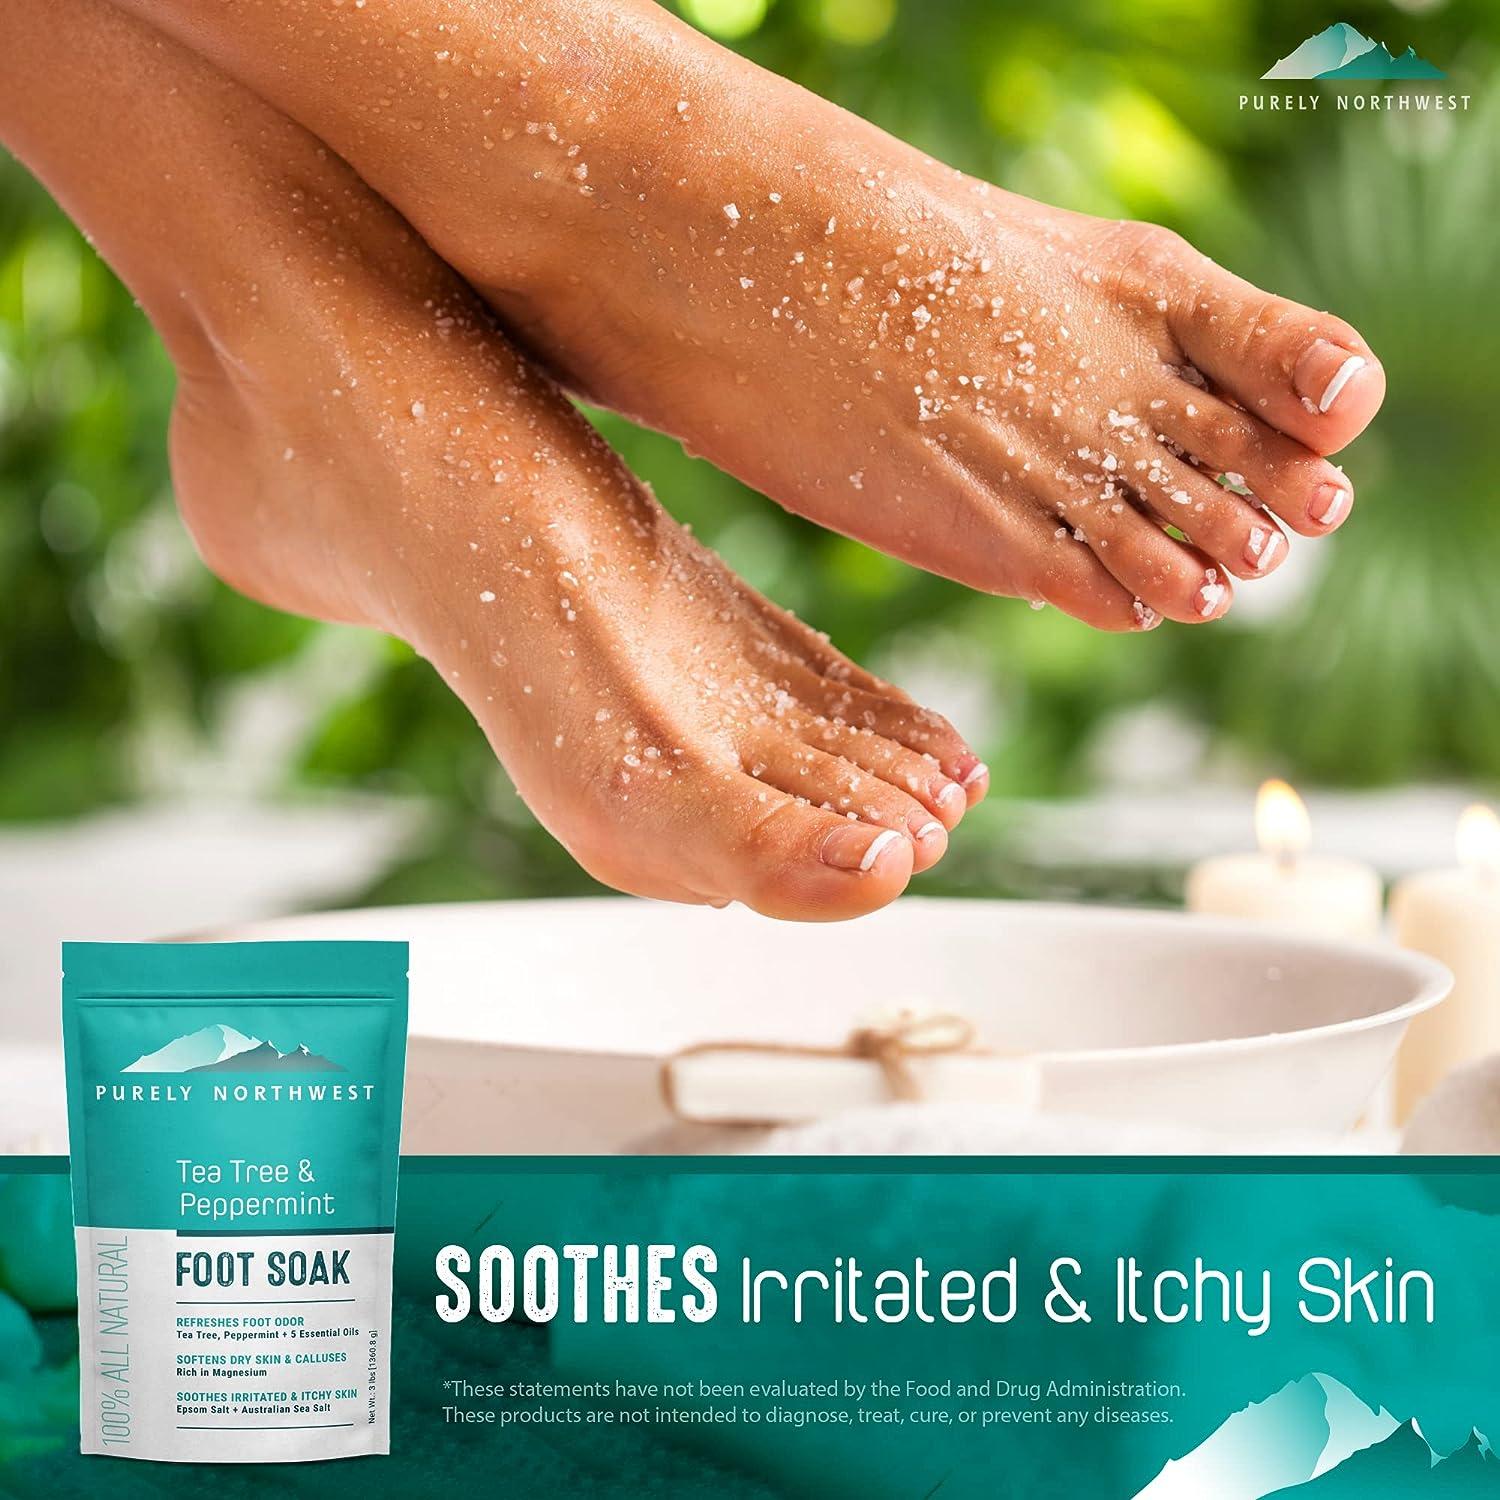 Corn Foot Cream: Using Moisturizing Products to Prevent and Treat Corns -  Luxe Foot SurgeryCorn Foot Cream: Using Moisturizing Products to Prevent  and Treat Corns